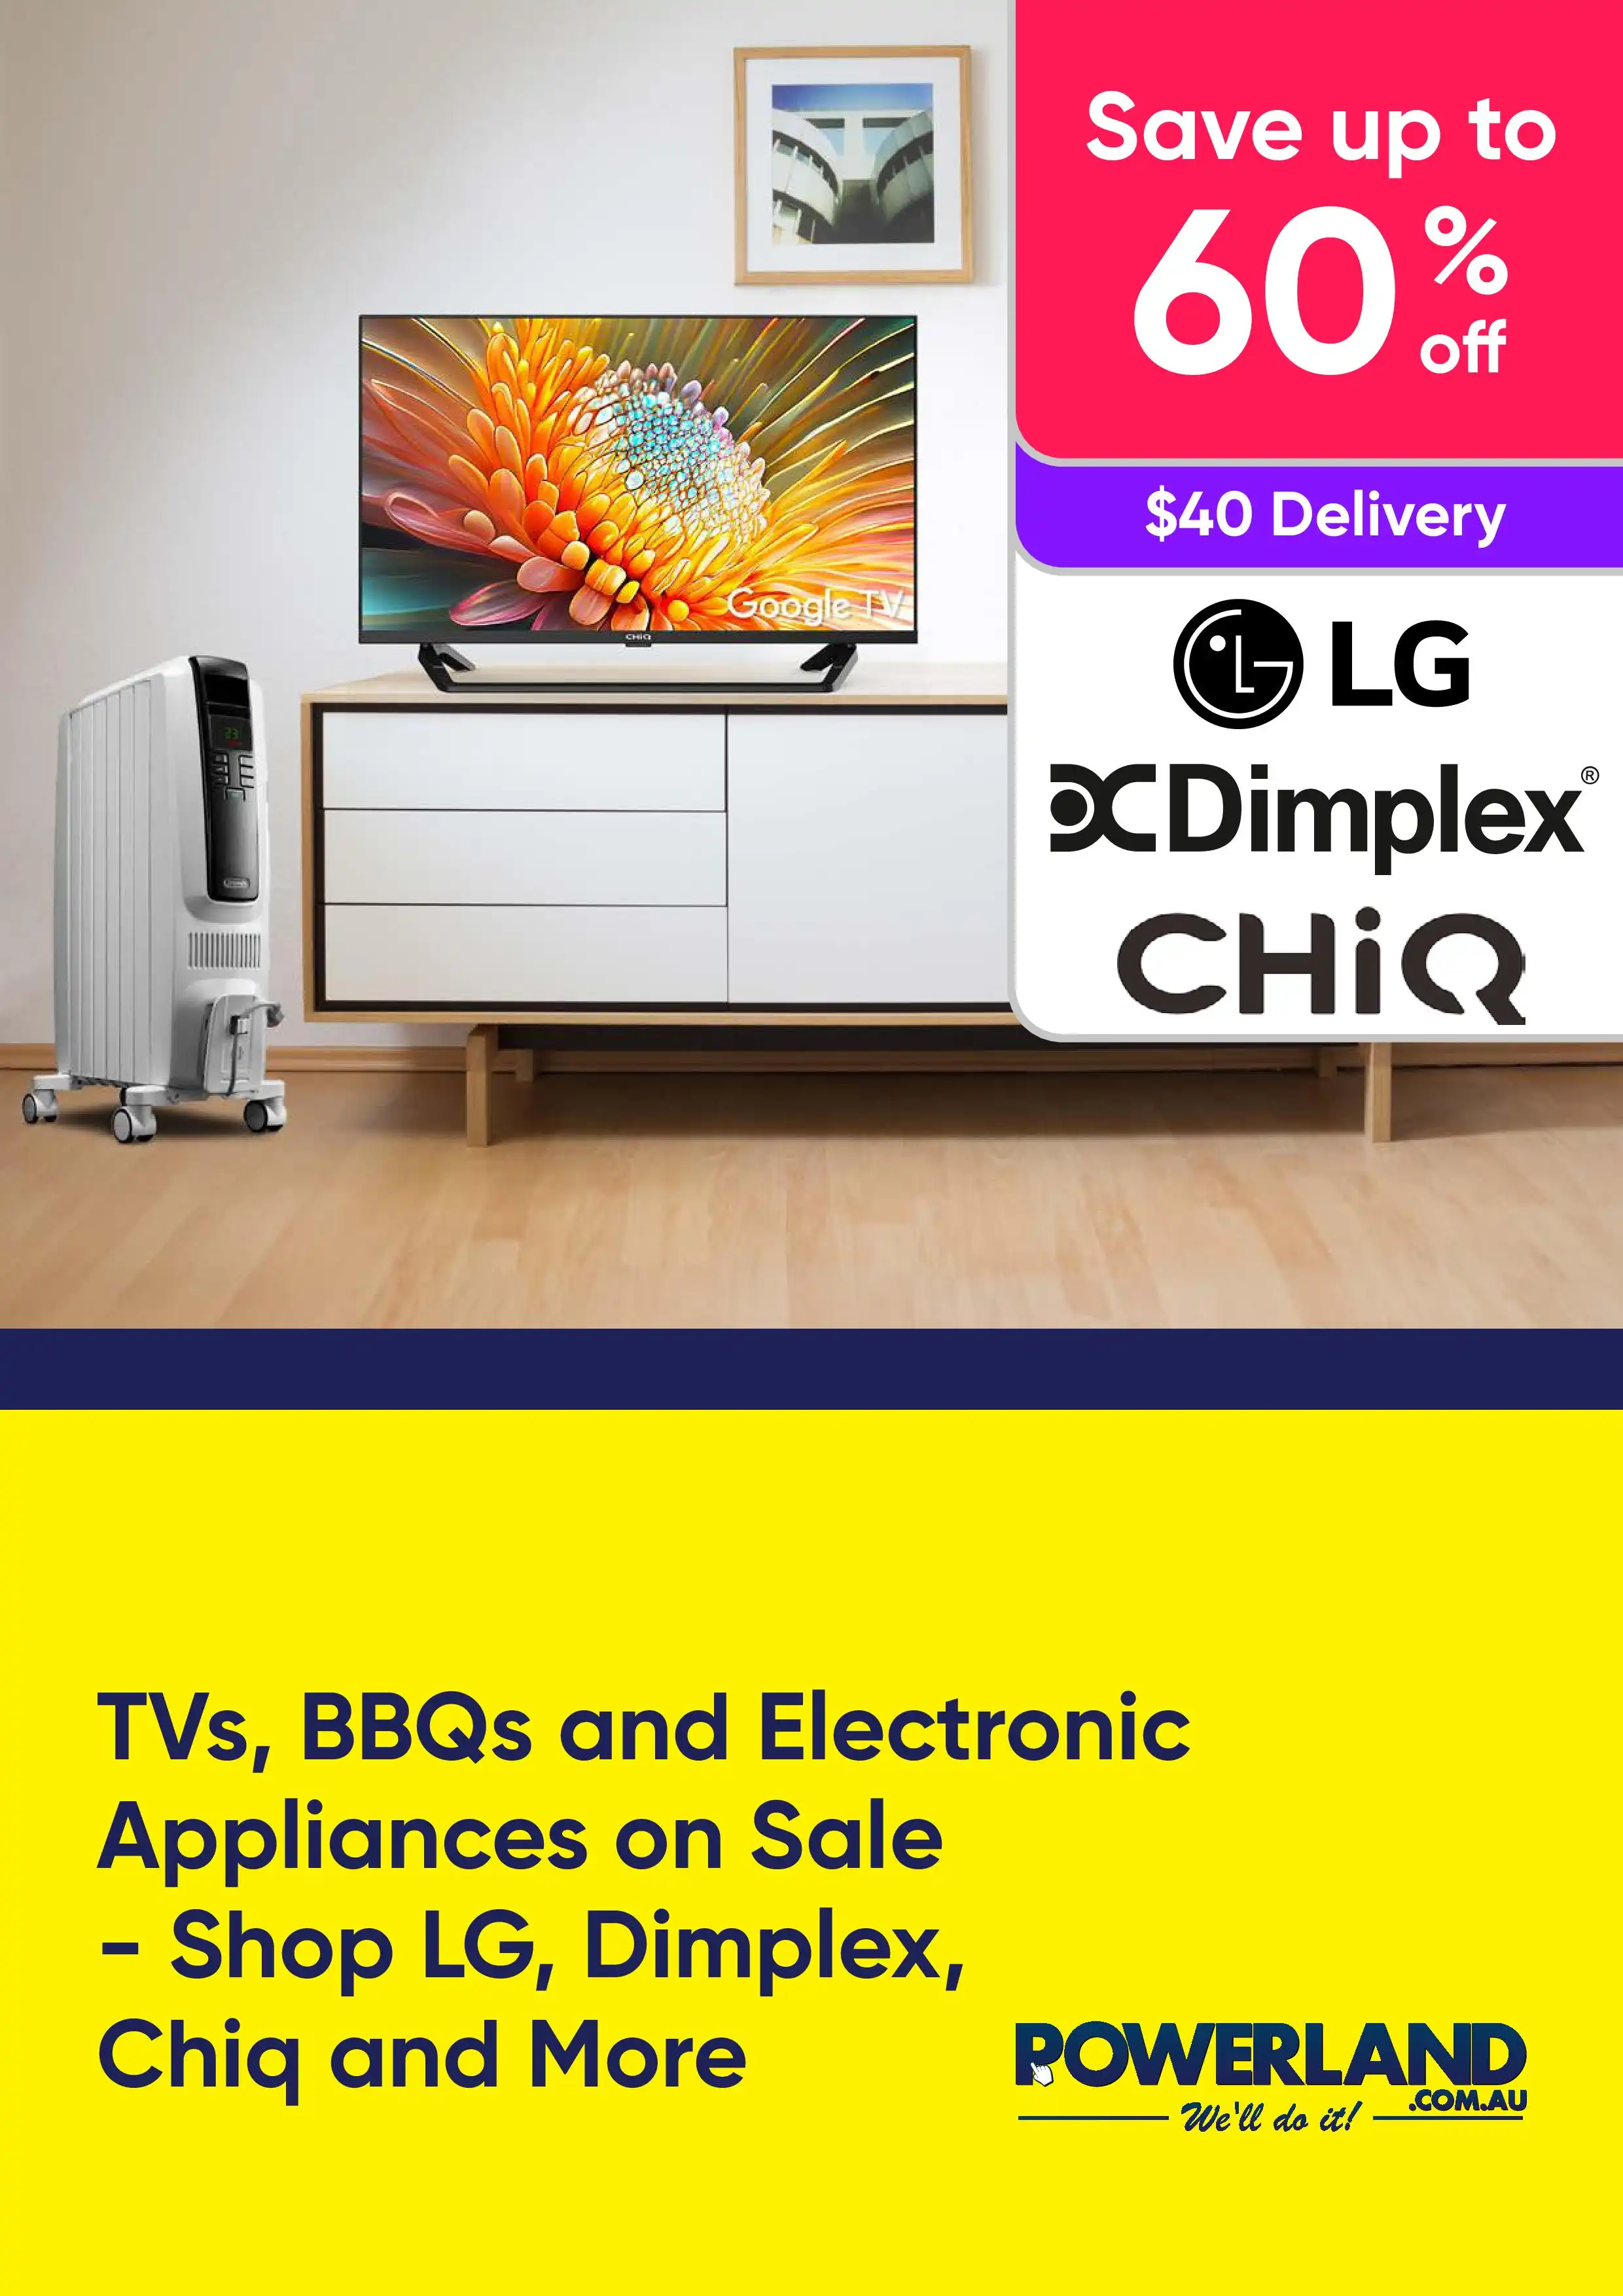 Shop Specials on TVs, BBQs and Electronic Appliances - Save Up to 60% Off